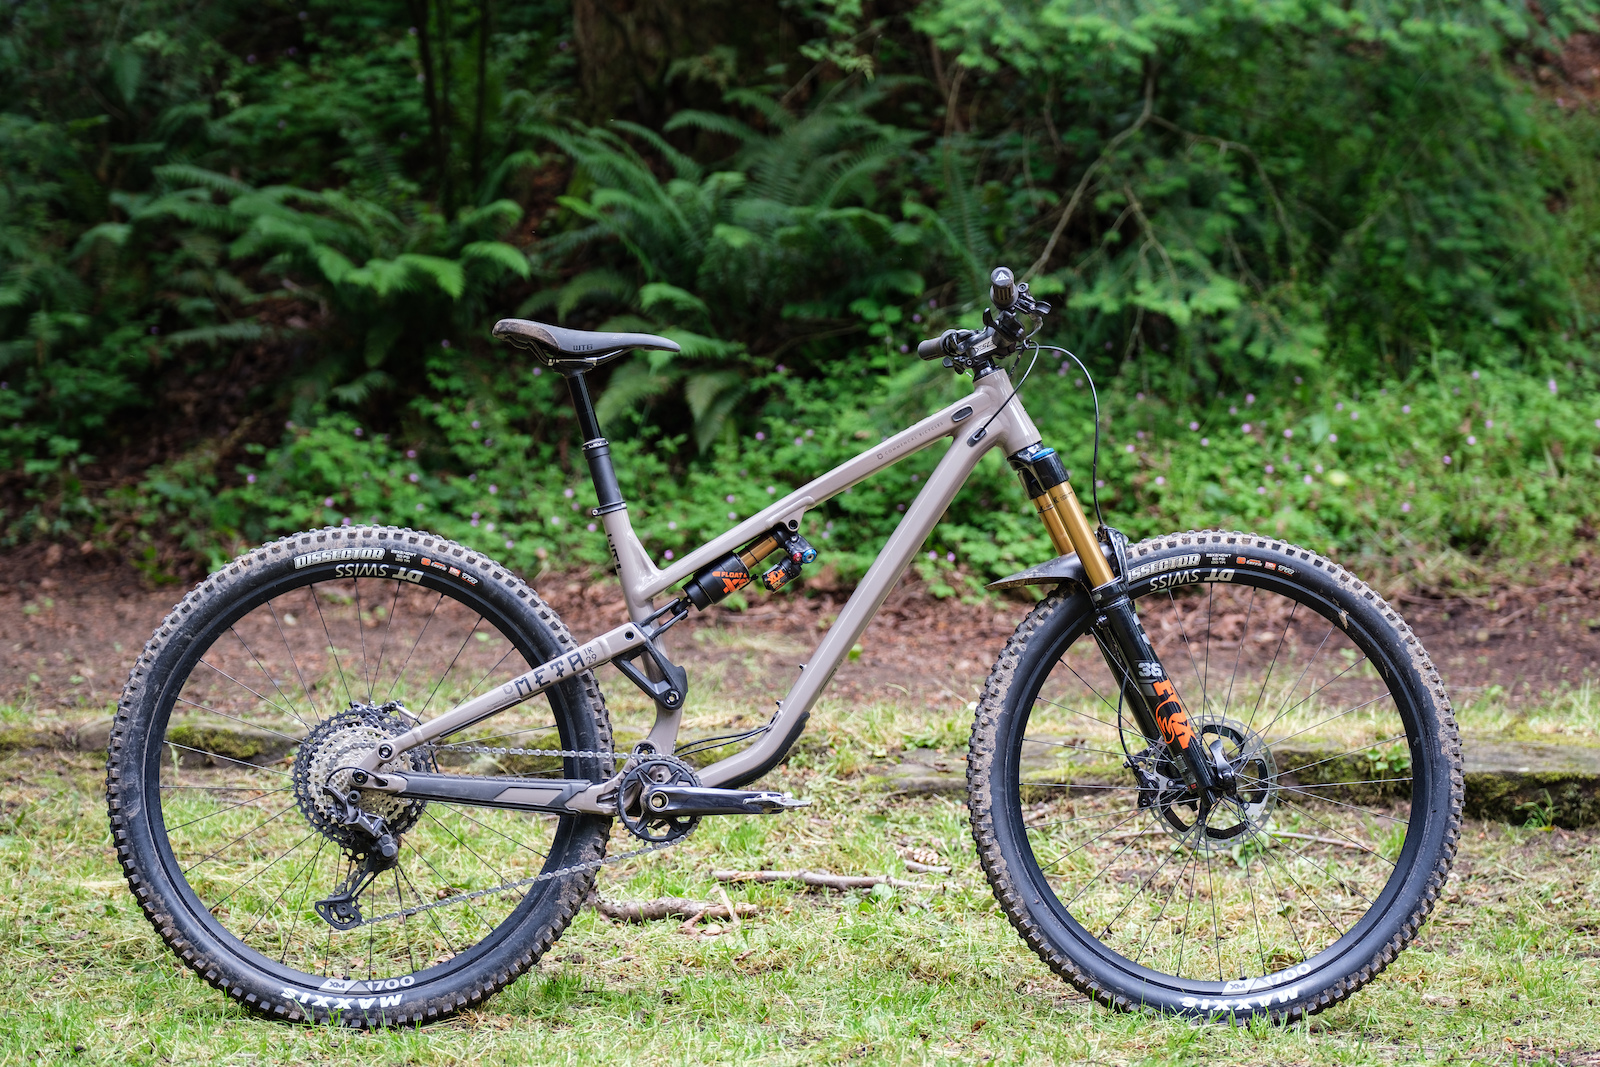 Review: 2021 Commencal Meta TR 29 - T is for Turbo - Pinkbike